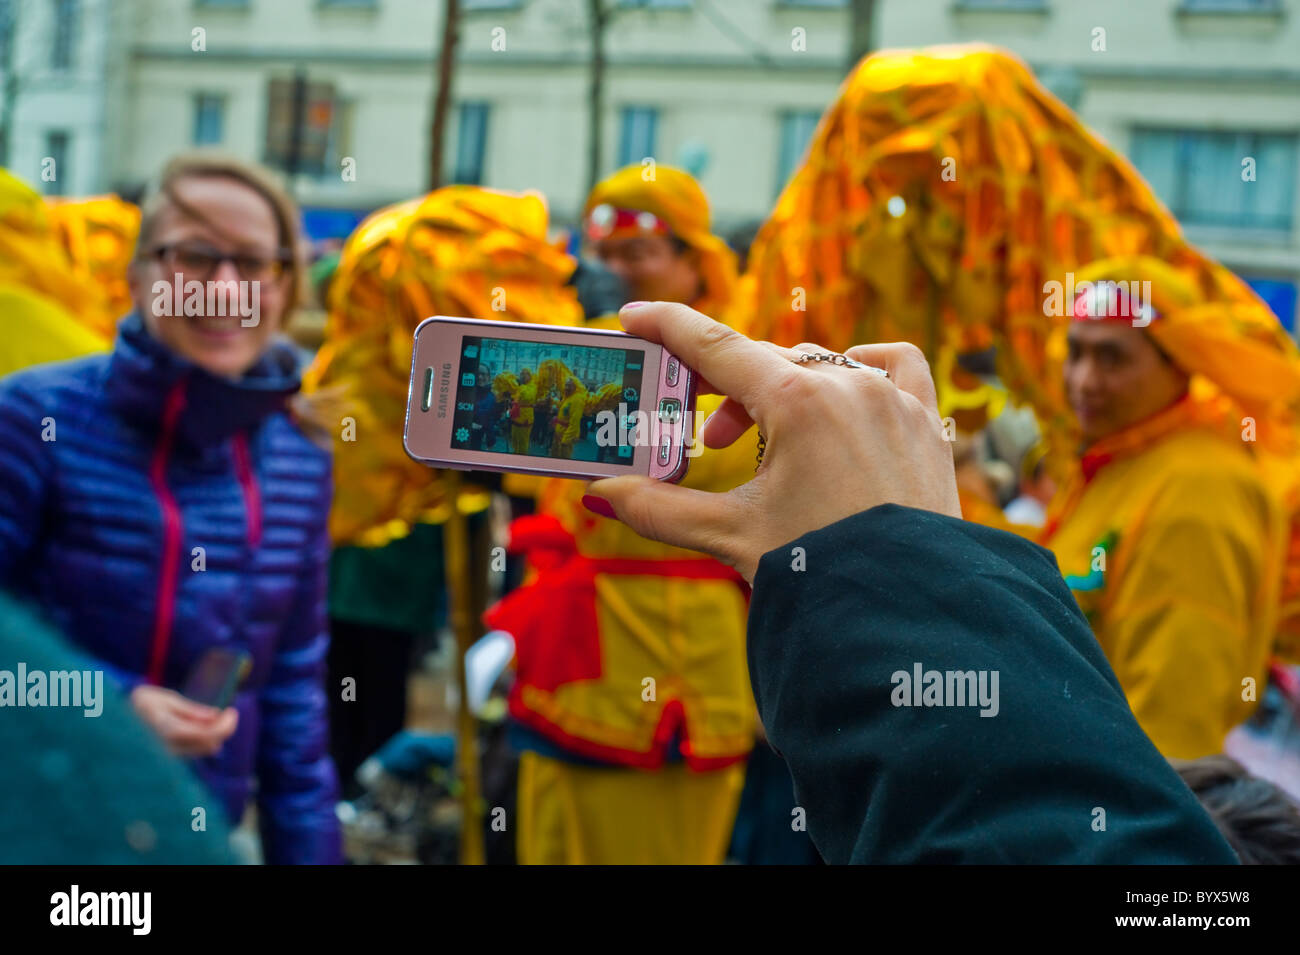 Paris, France, Street Scenes, Belleville Chinatown, Woman Taking Photos, Holding Smart Phone in hand, 'Chinese New Year' Stock Photo